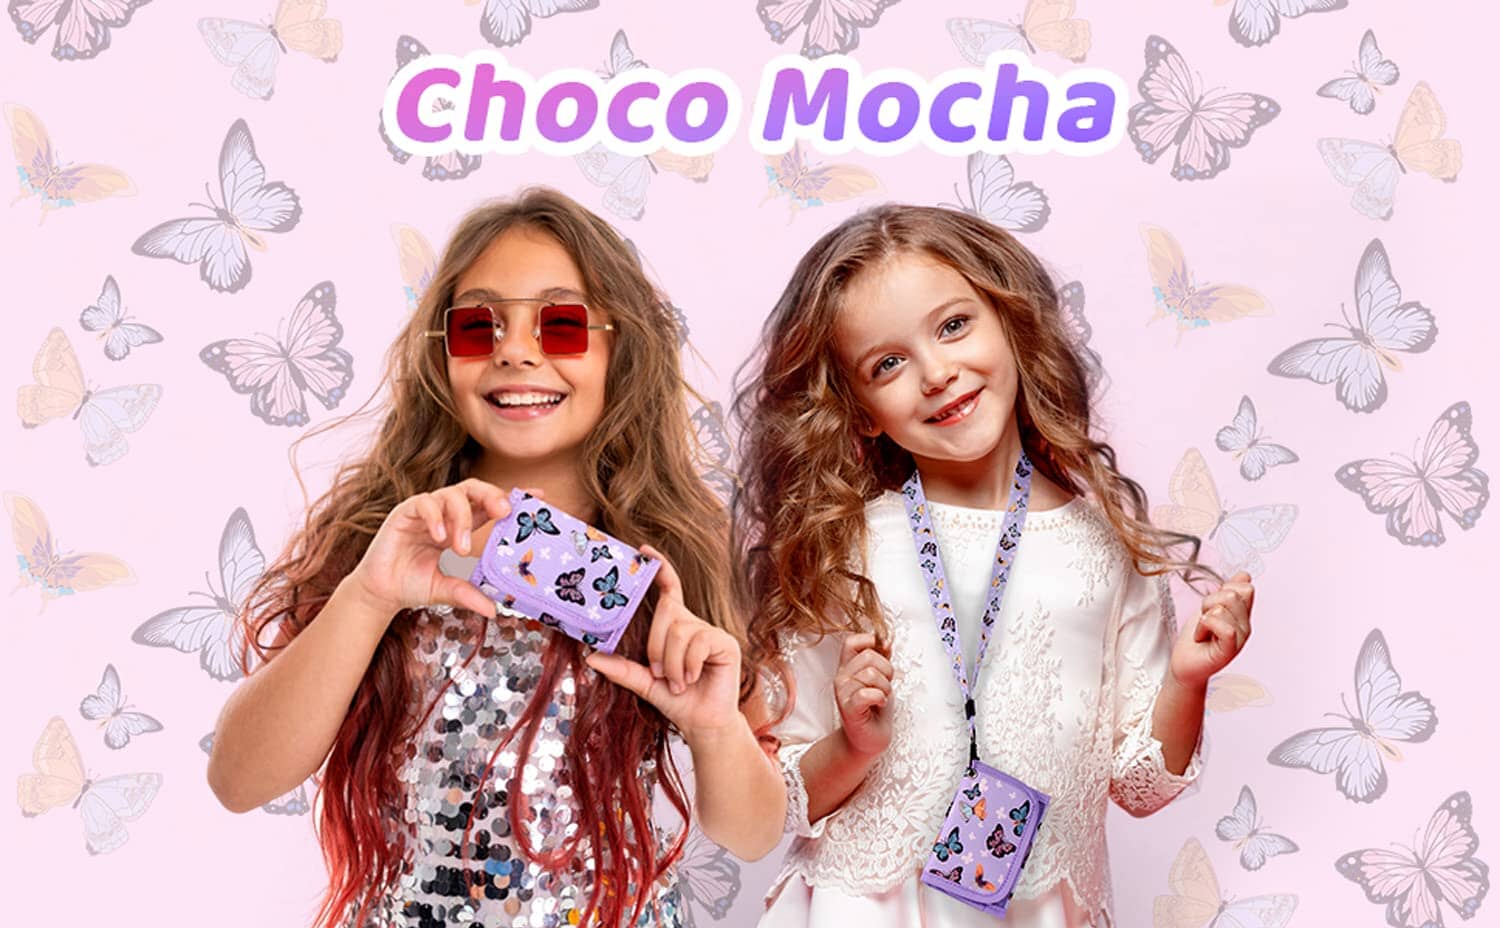 Choco Mocha Butterfly Kids Wallets for Girls Ages 5-7 6-8 9-12, Little Girls Velcro Wallets with Lanyard Gift Box, Christmas Gift for Kids Girls, Purple chocomochakids 